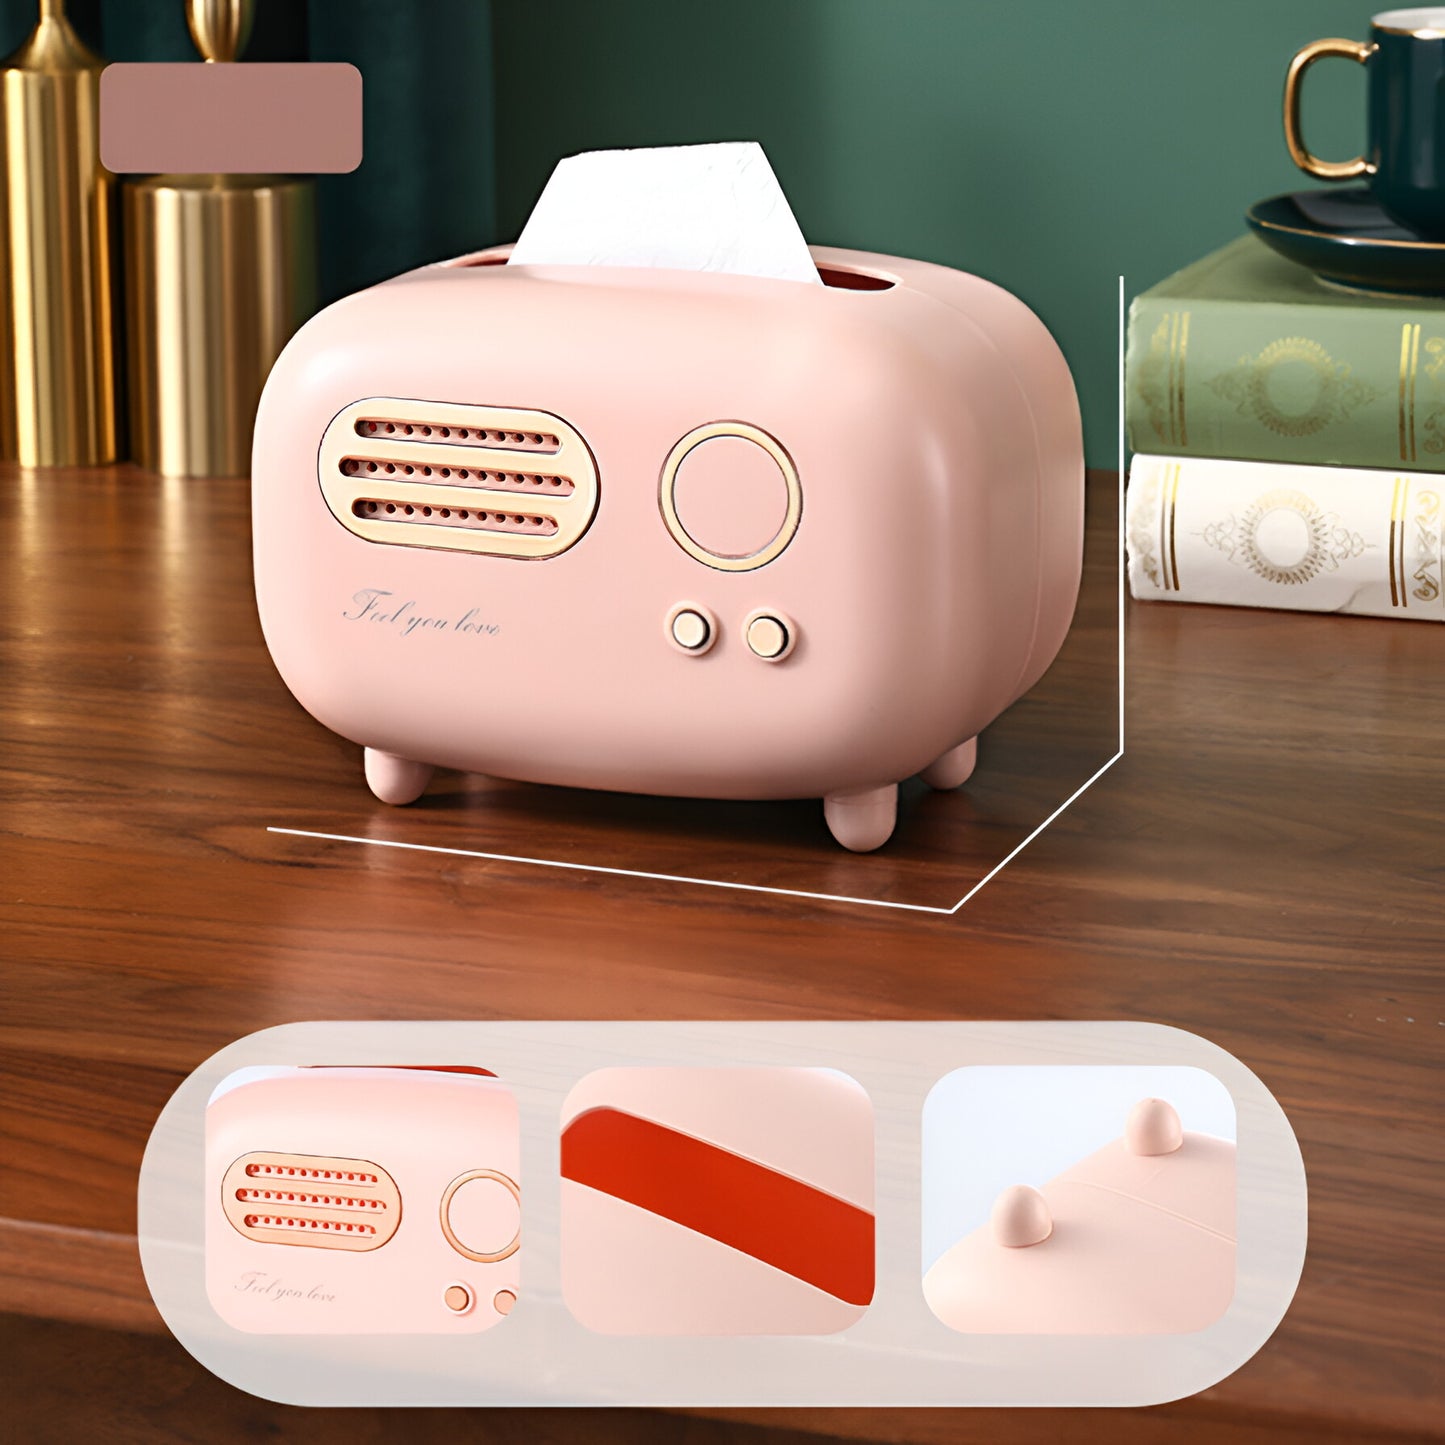 Vintage Radio Shaped Tissue Box Holder, Luxurious Living Room Dining Table Napkin Holder, Remote Control Coffee Table Organizer, Ideal for Kitchen Bathroom Bedroom Home Decor, Available in 3 Colors and Various Sizes